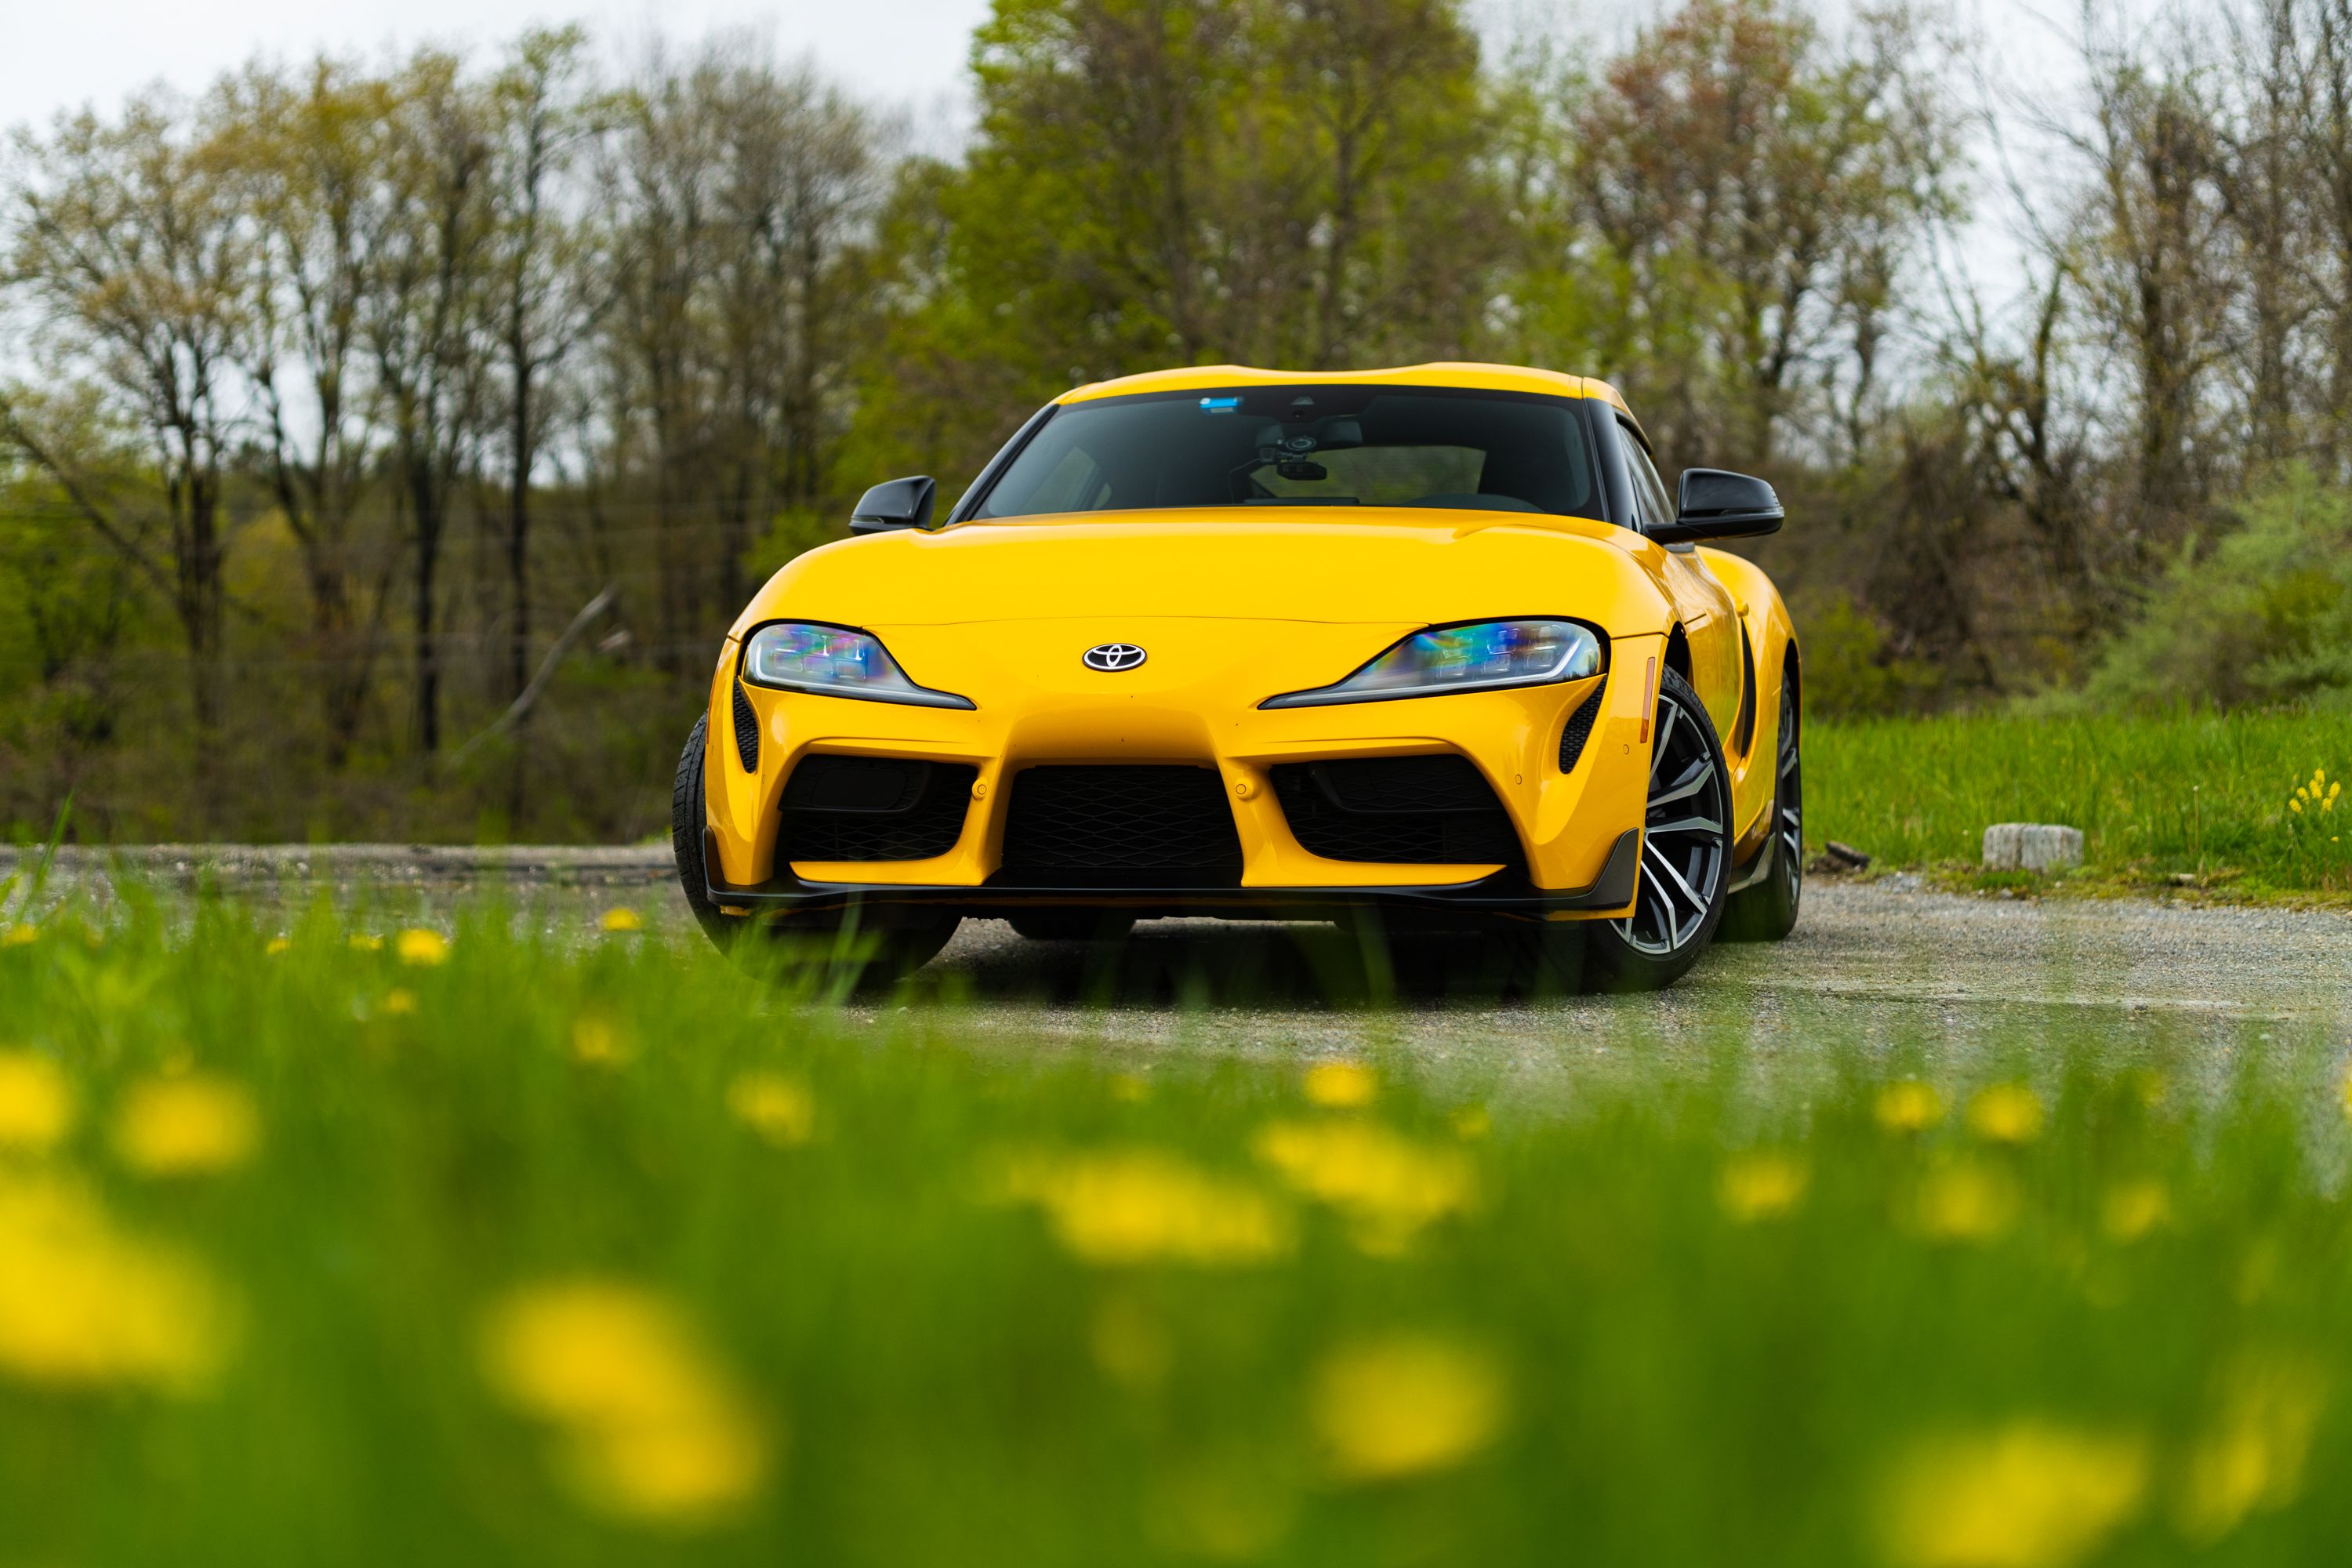 Toyota Supra 2.0 Road Test Review